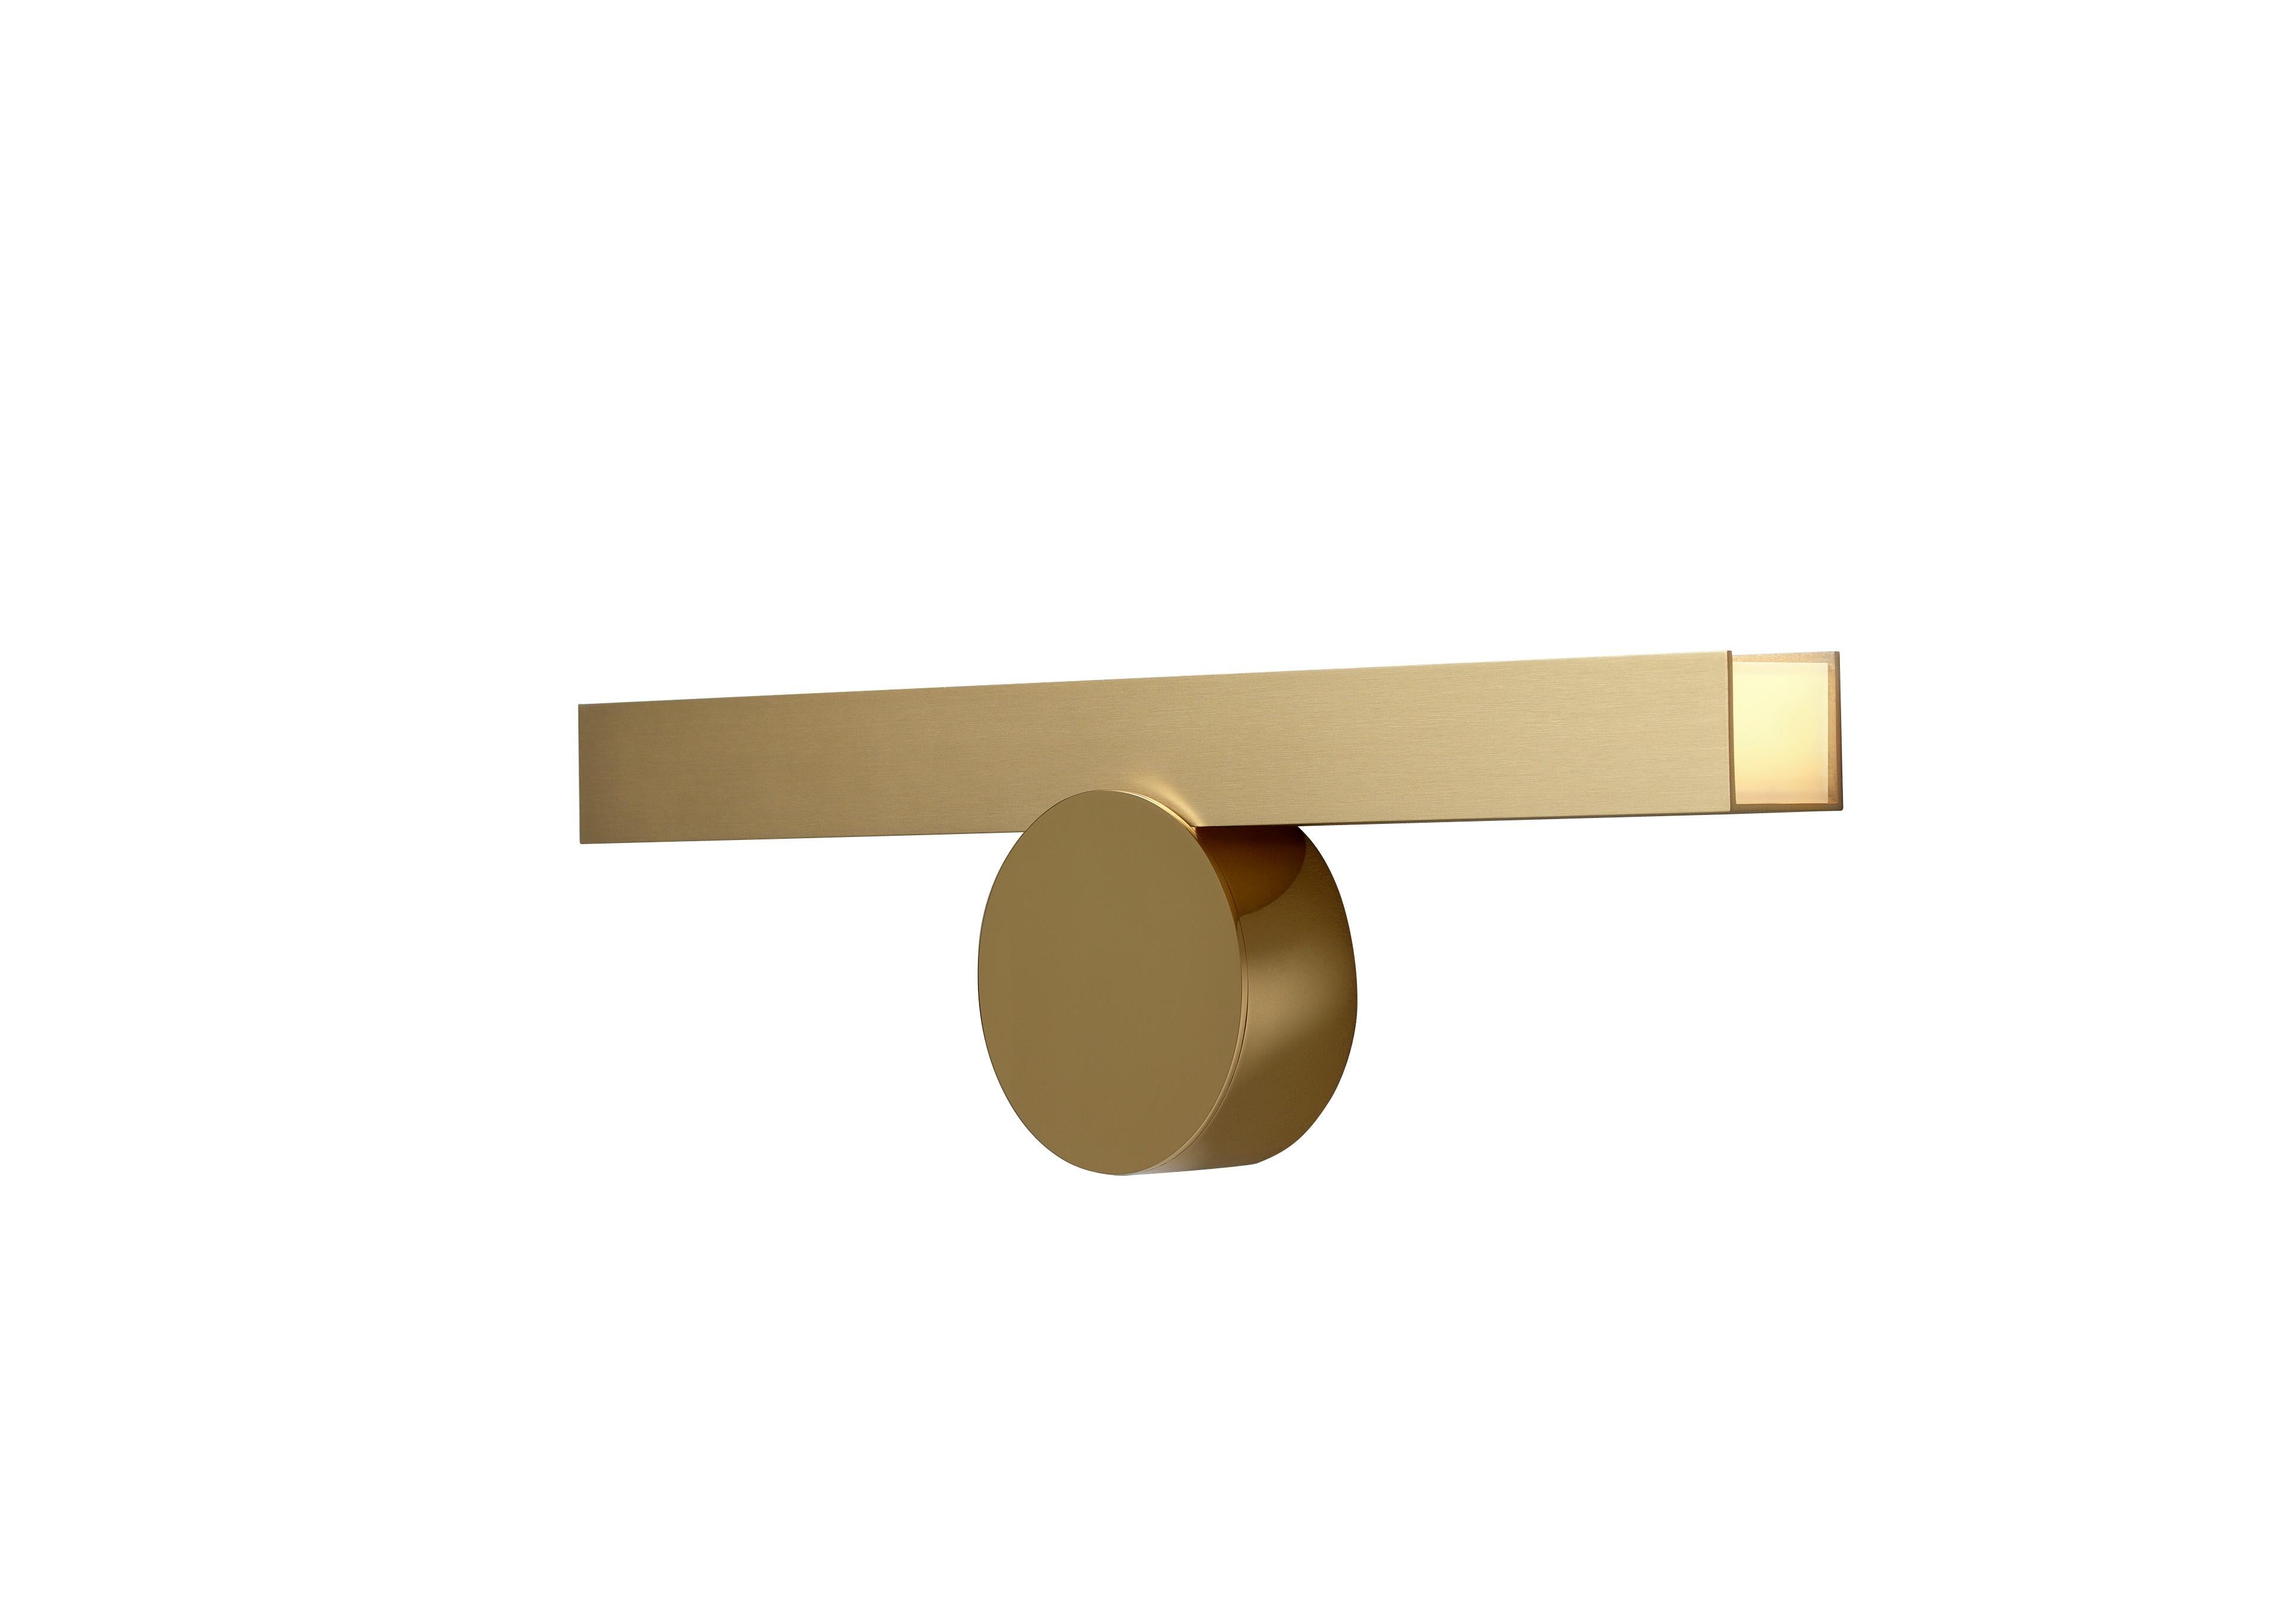 IP Calee V1 satin and polished brass wall light by POOL
Dimensions: D45 x W4.4 X H13 cm
Materials: solid brass, satin and polished brass
Others finishes and dimensions available.

All our lamps can be wired according to each country. If sold to